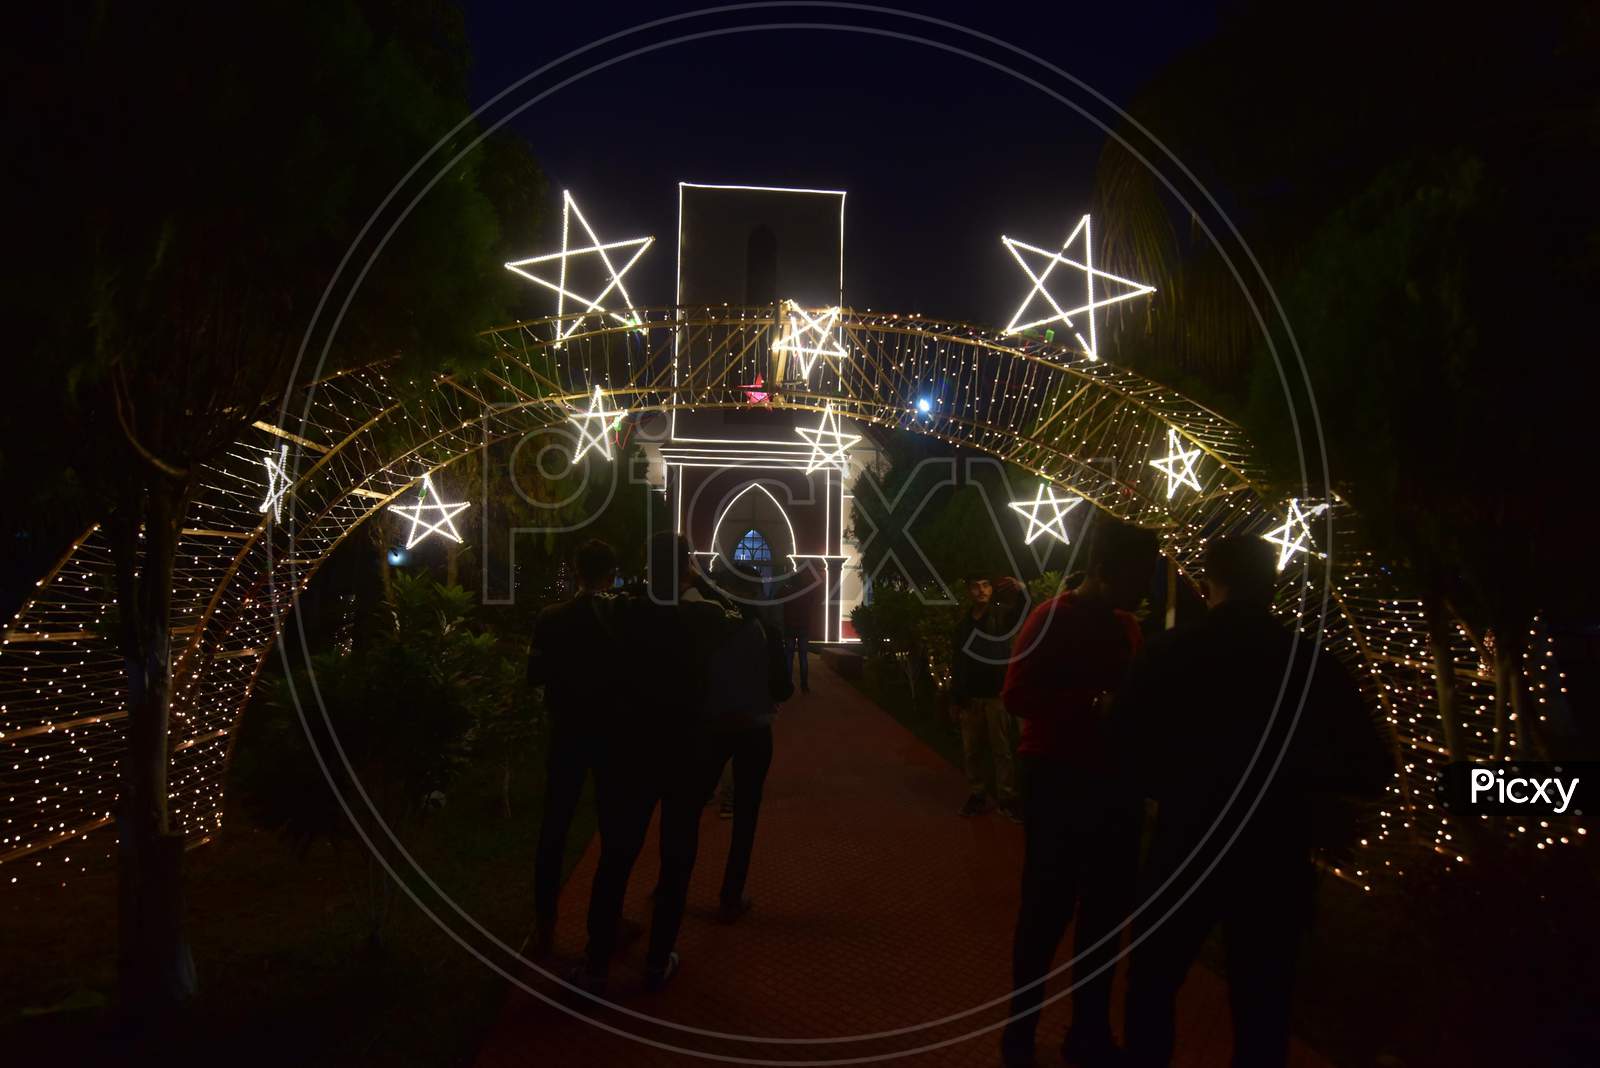 Illuminated  Baptist Church ahead of the Christmas festival, in  Nagaon District of Assam on Dec 24,2020.The Nagaon Baptist Church was established in 1846 by Miles Bronson, considered as one of the pioneers in conserving and promoting the Assamese language